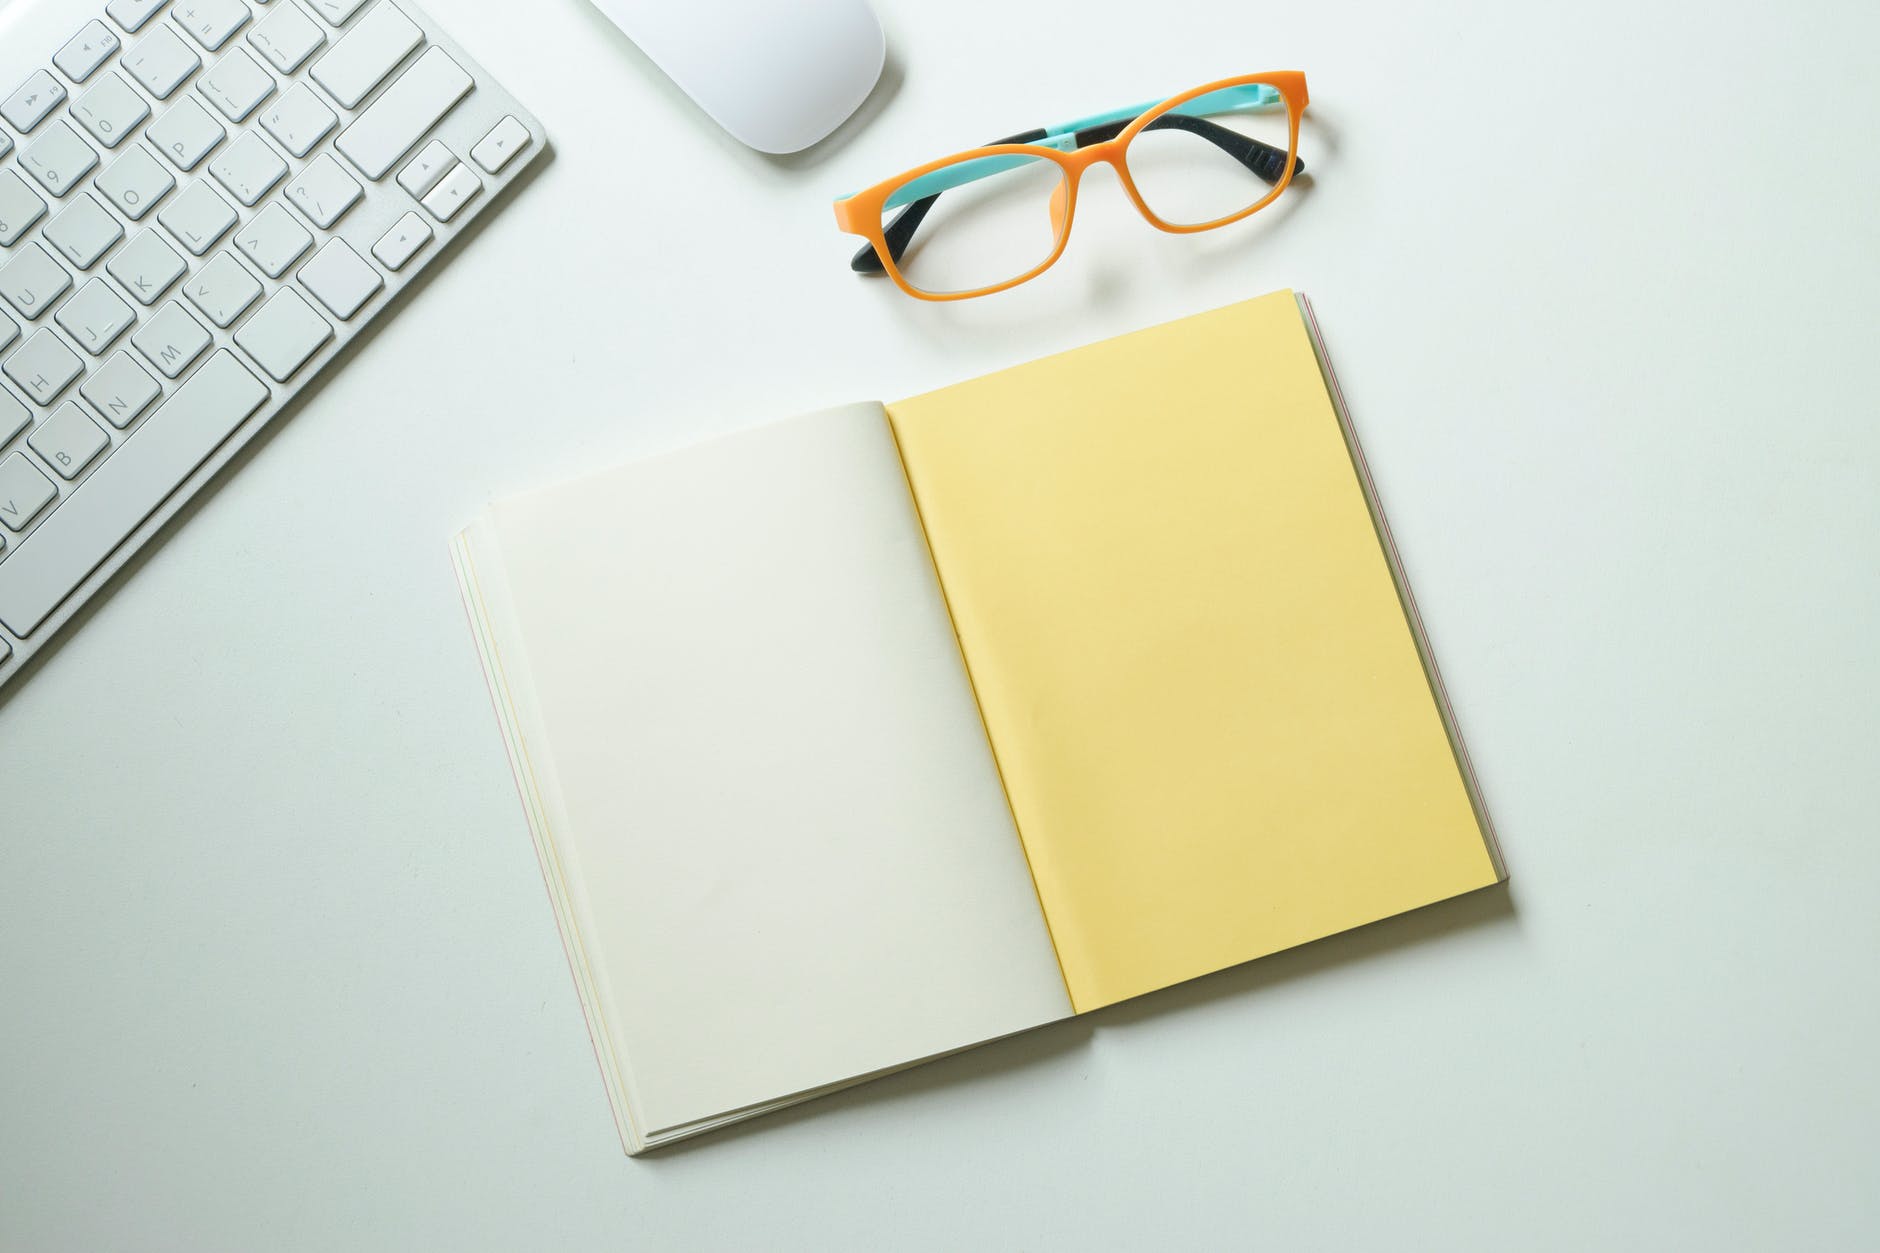 white and yellow notebook placed near keyboard and eyeglasses